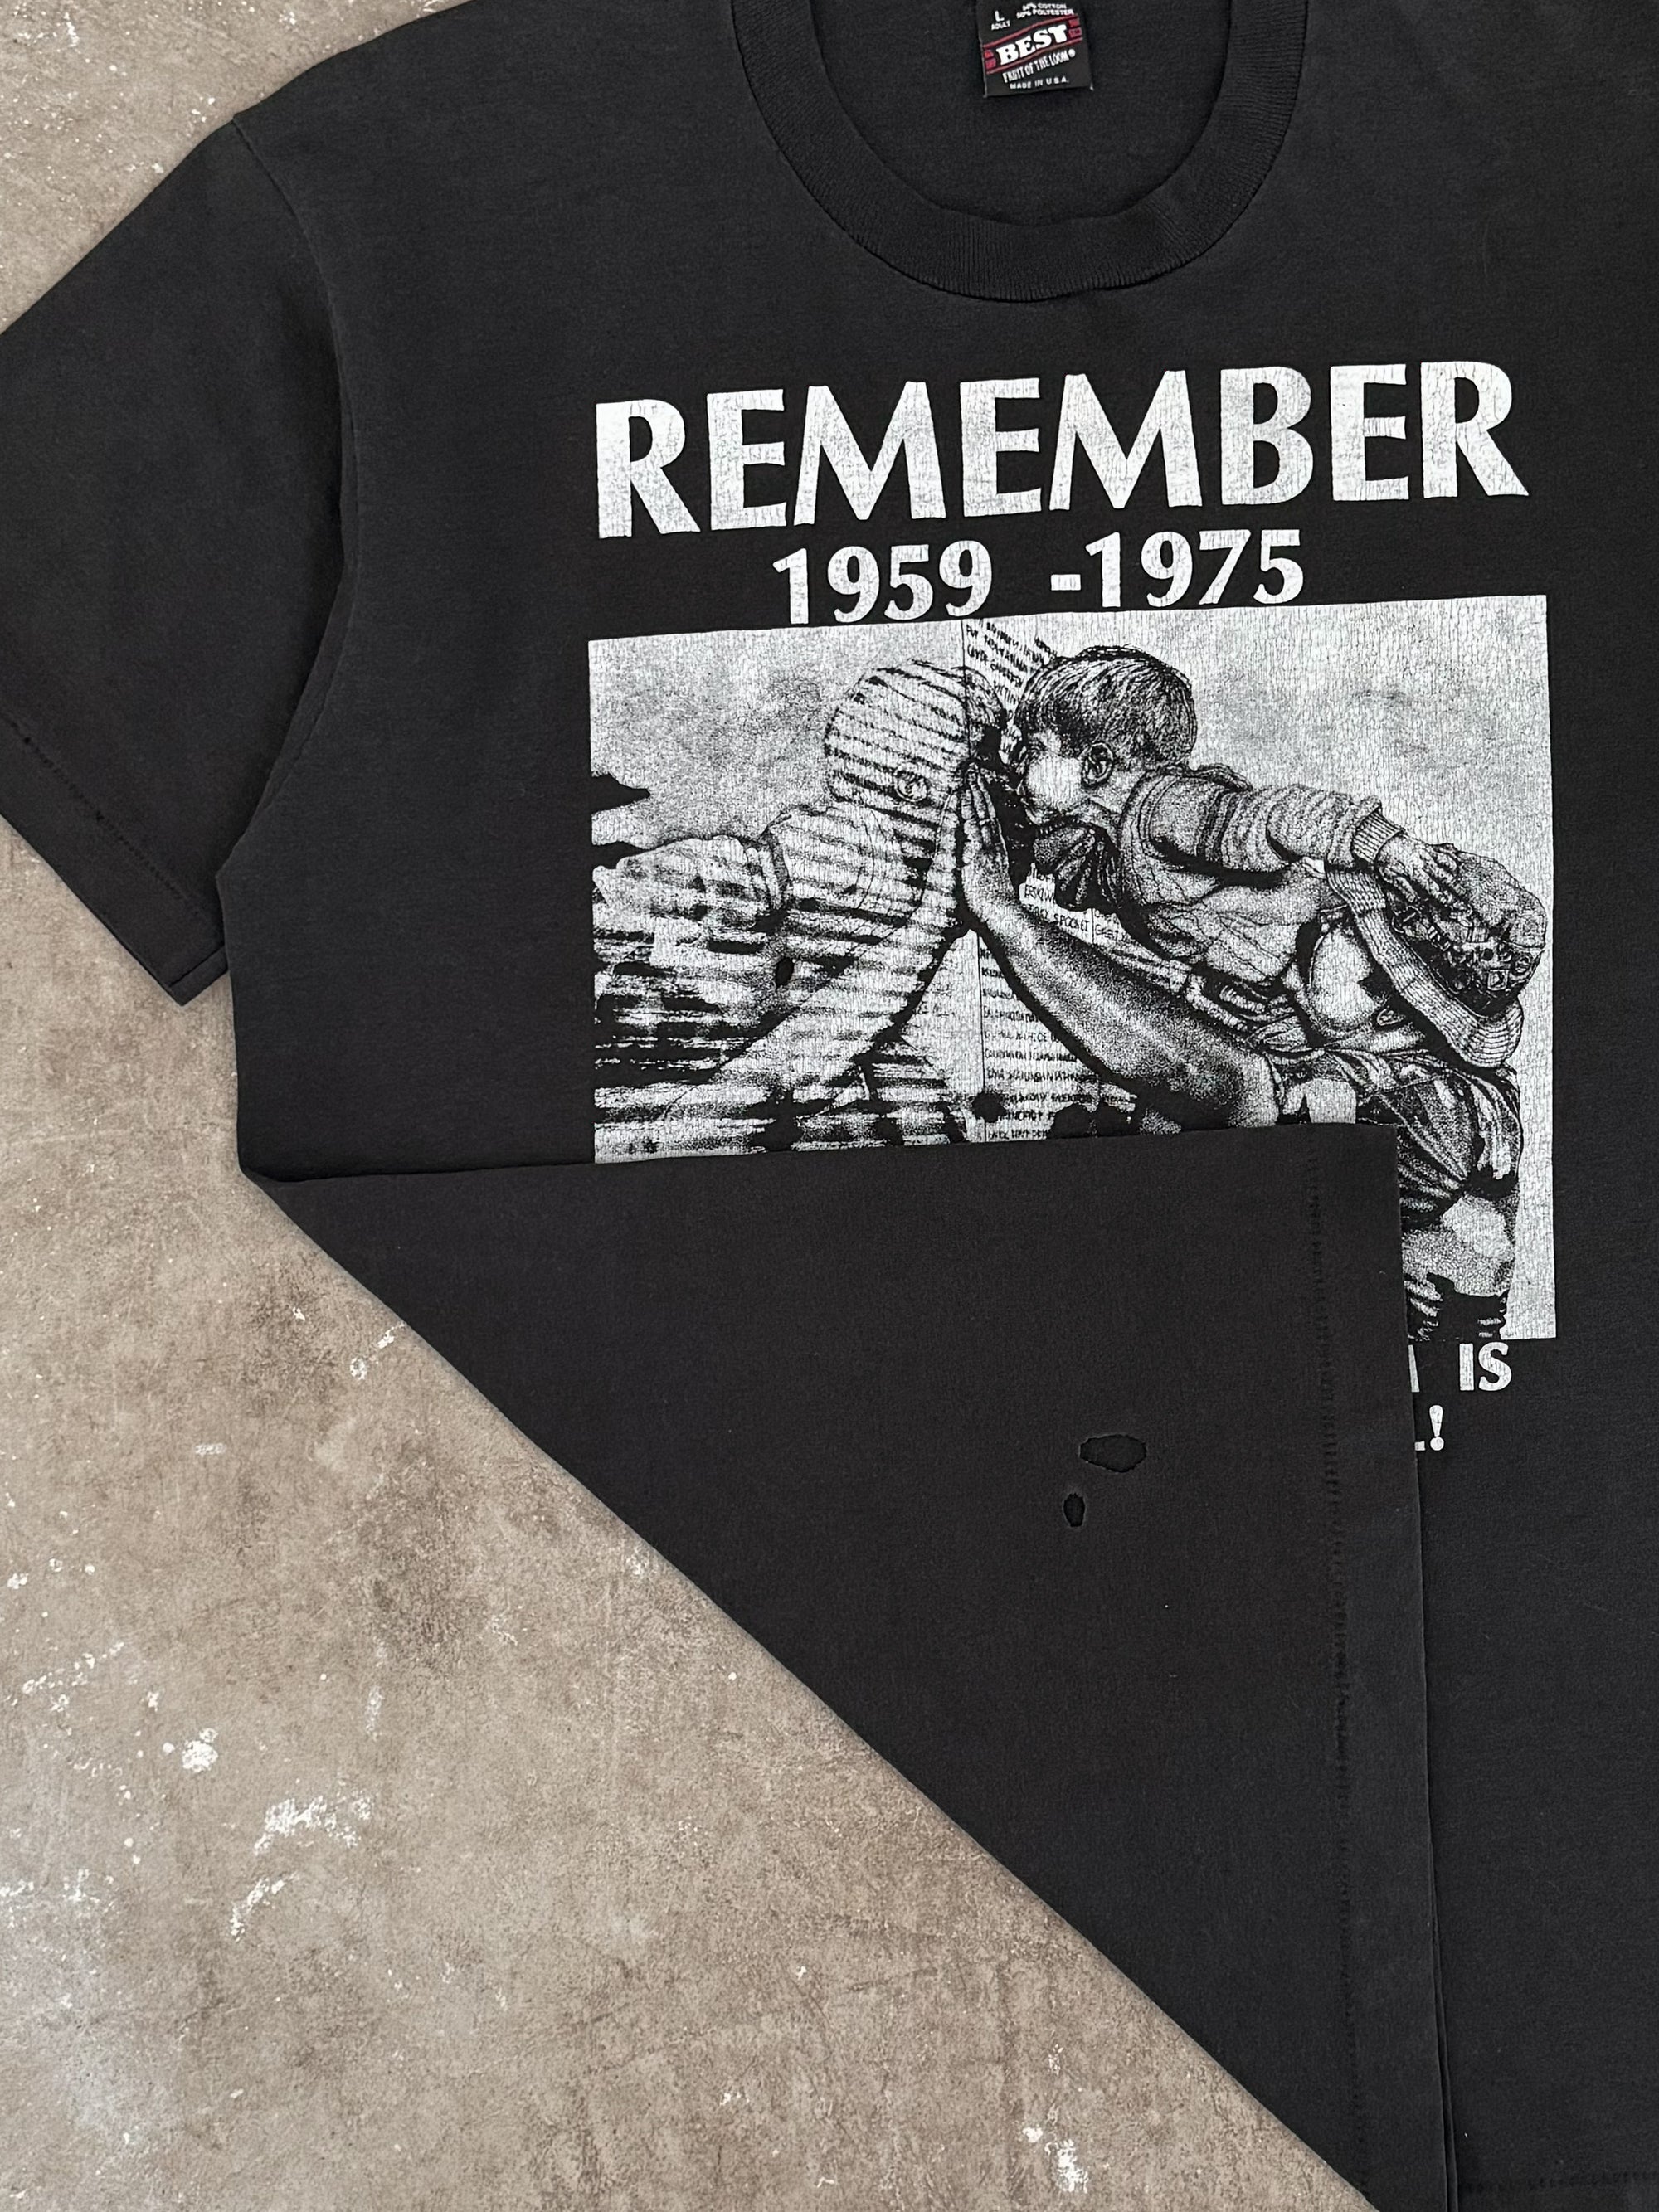 1990s "Remember" Tee (M/L)